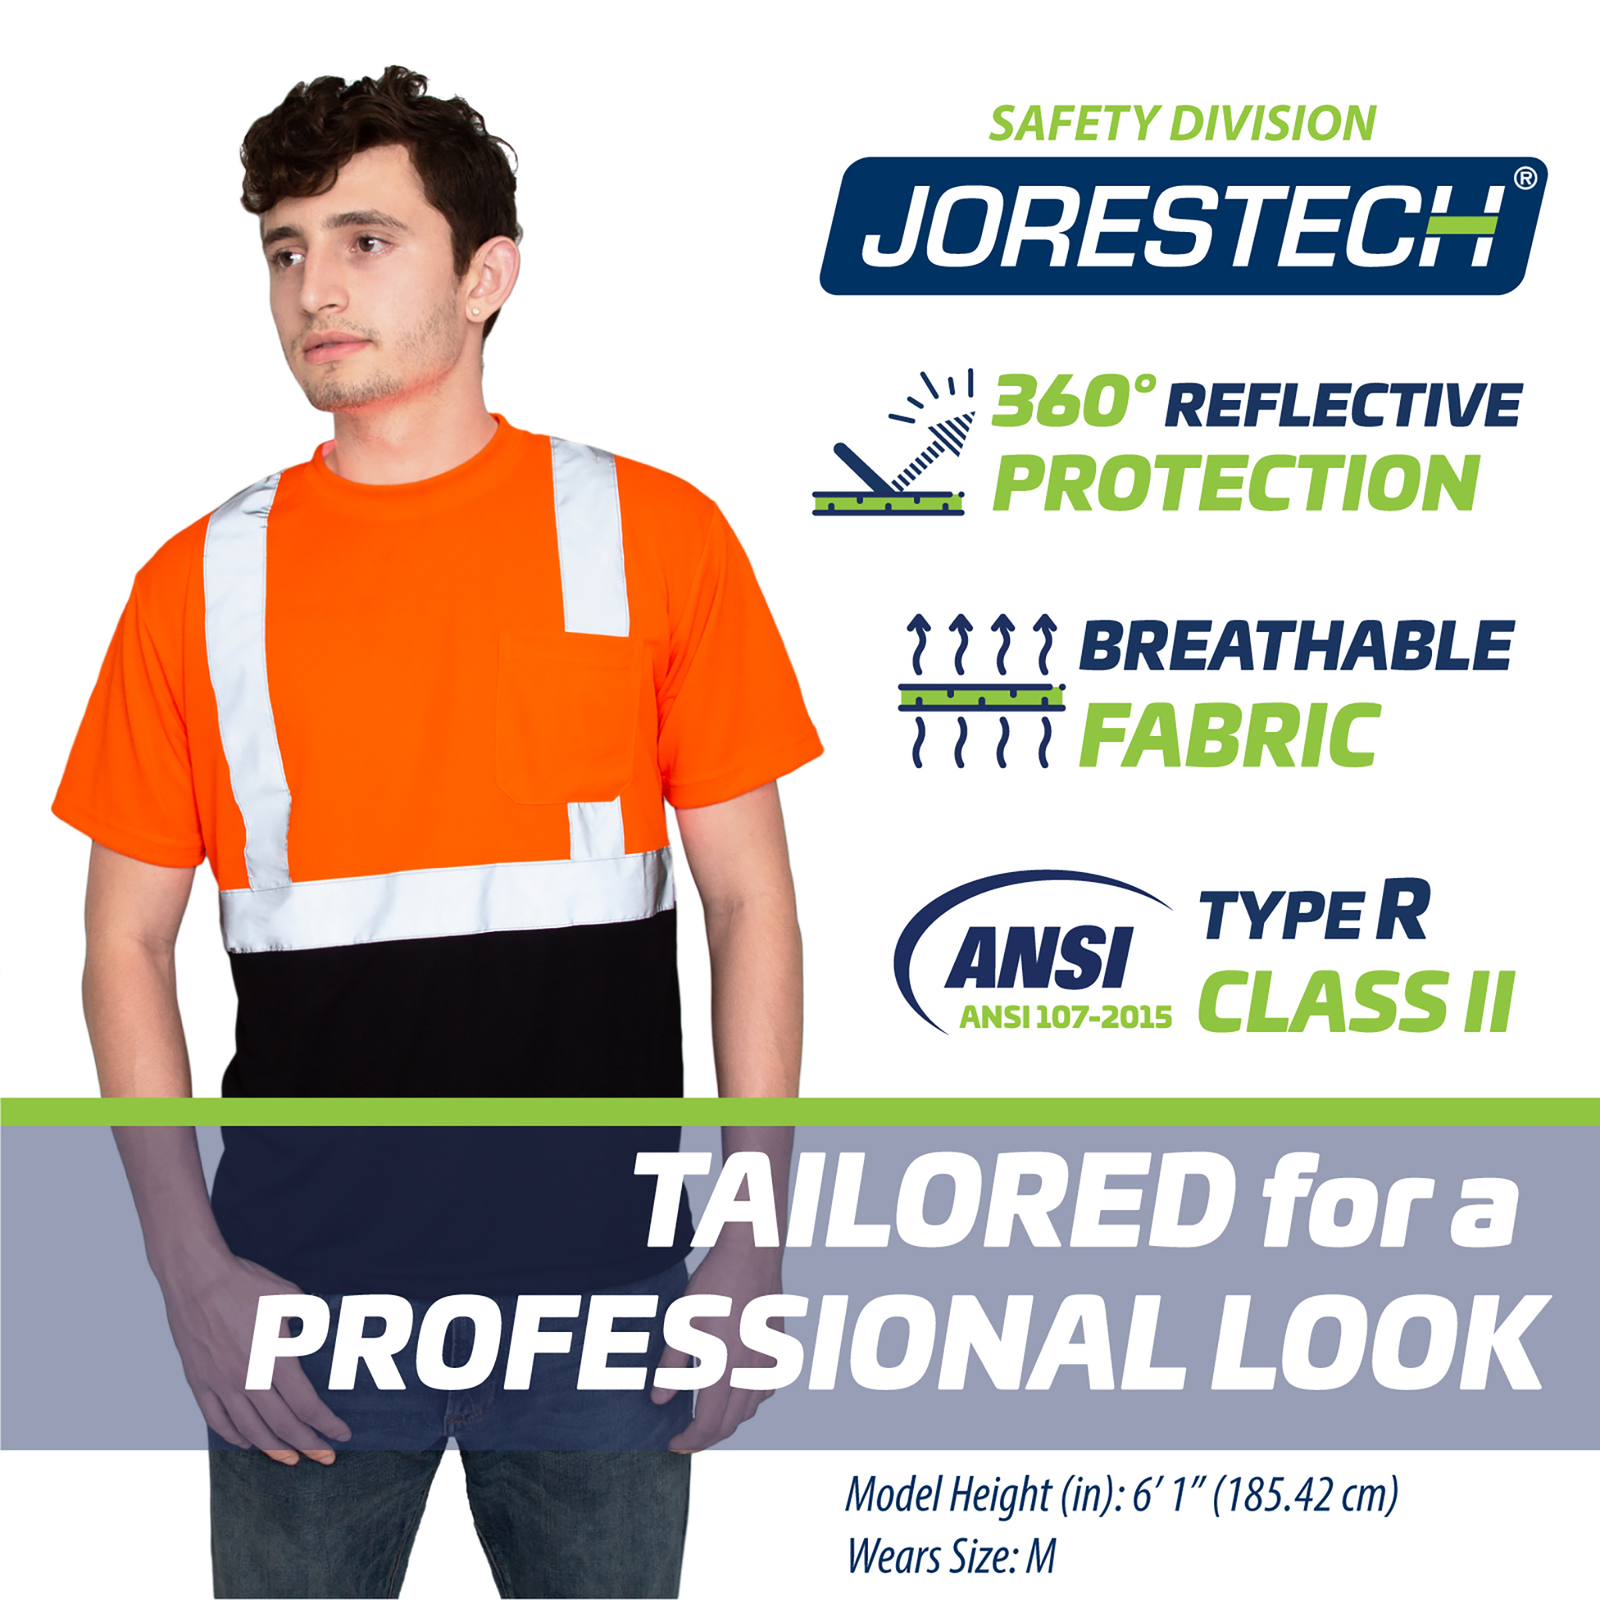 A worker wearing the Jorestech orange/black safety shirt. Icons with text read: 360 degrees of reflective protection. Breathable fabric. Type R class II. Tailored for a professional look.